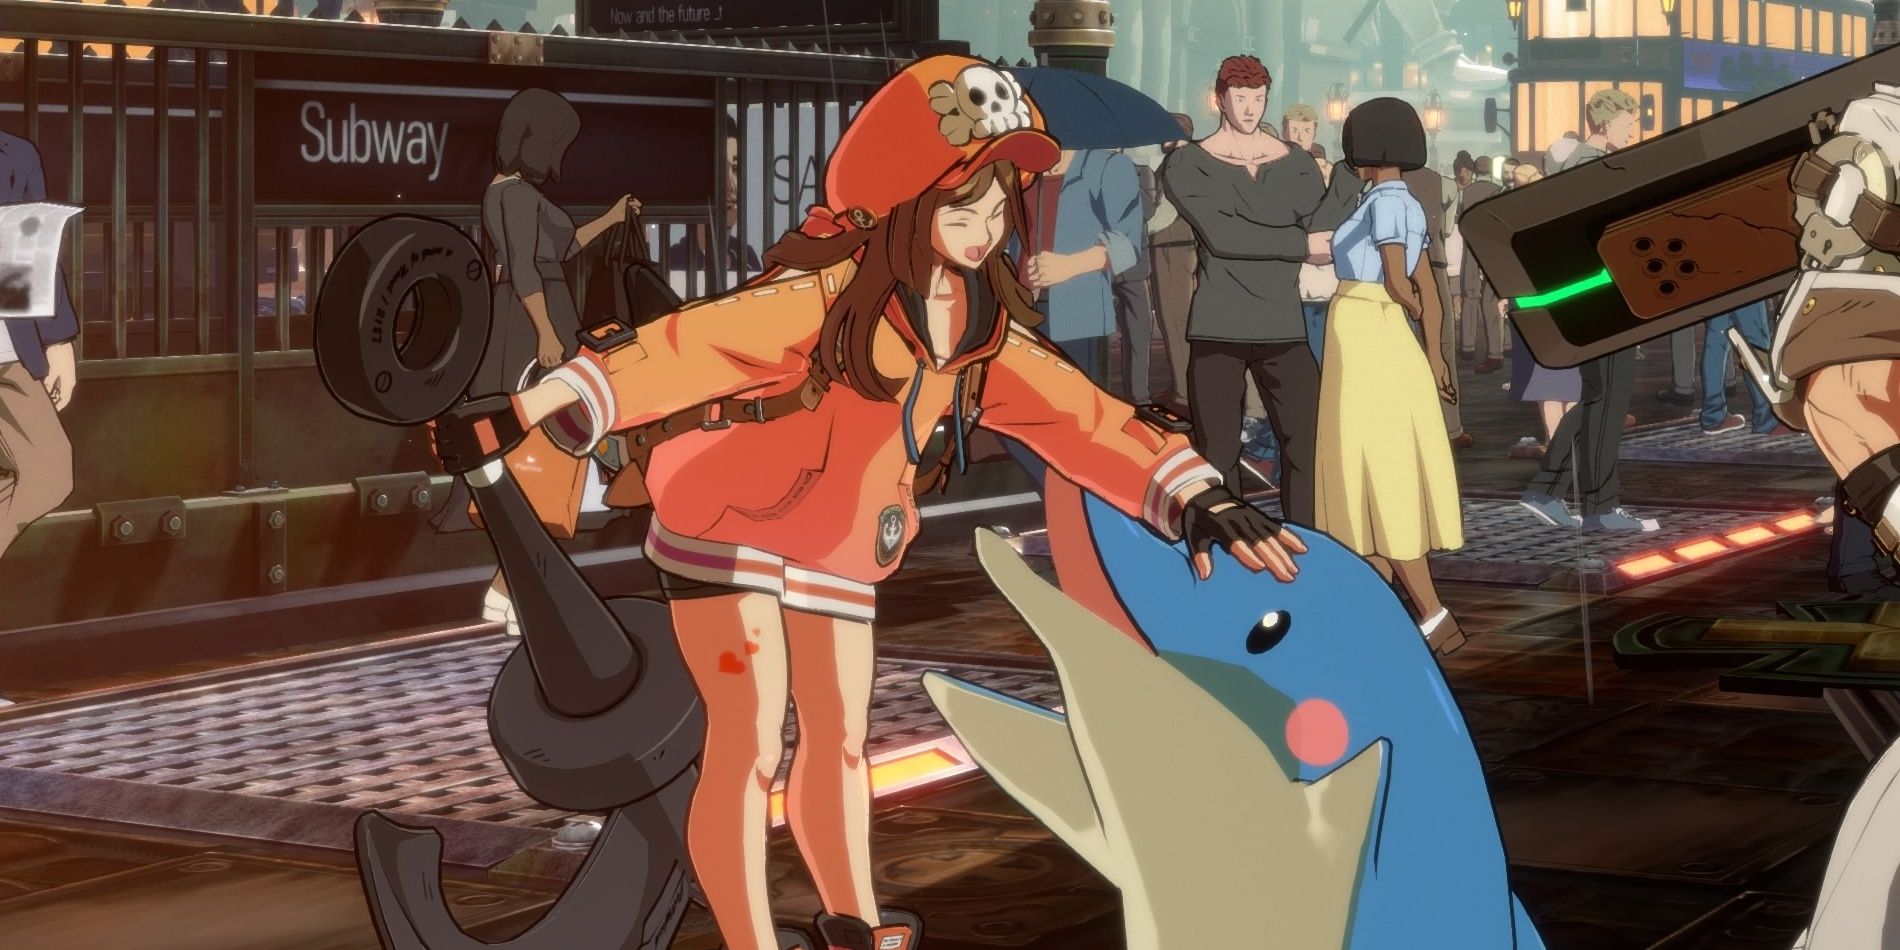 May petting Mr. Dolphin in Guilty Gear -Strive-